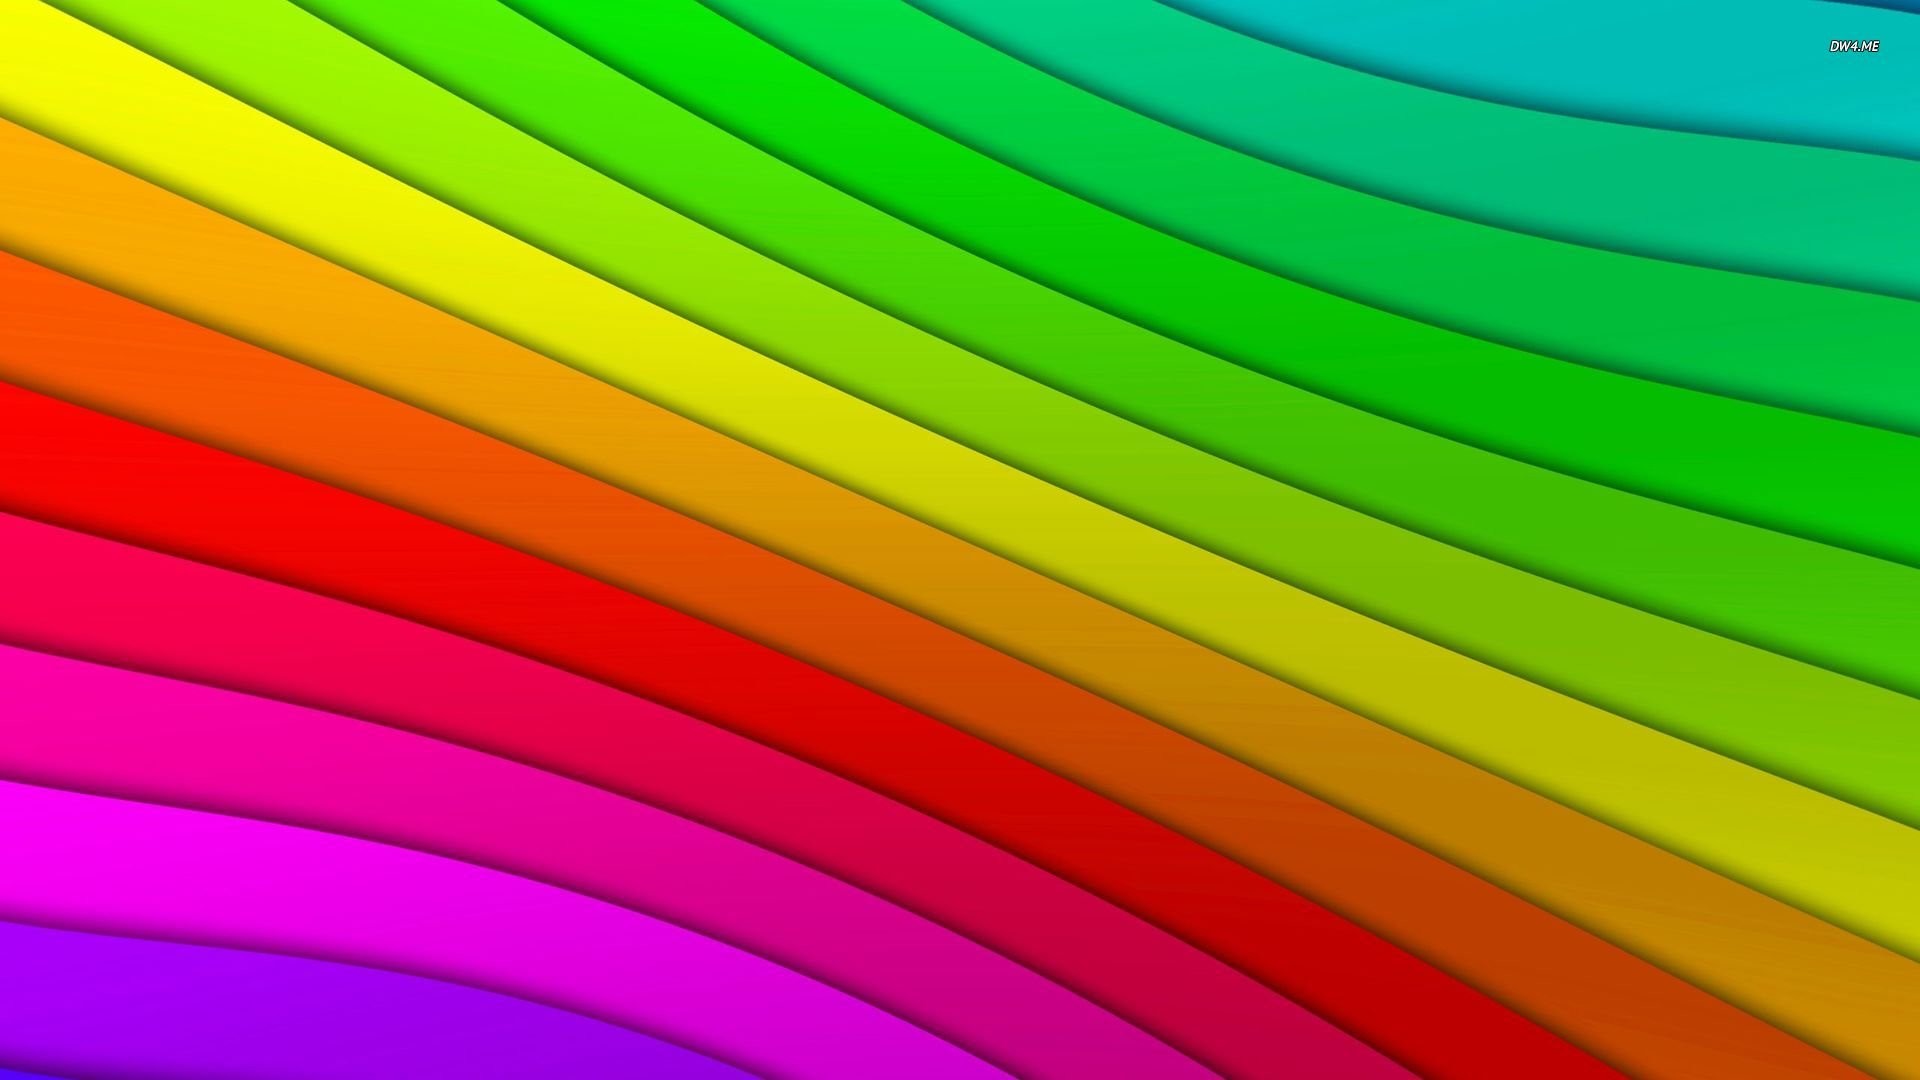 1920x1080 Colored Curved Lines 342504 ...